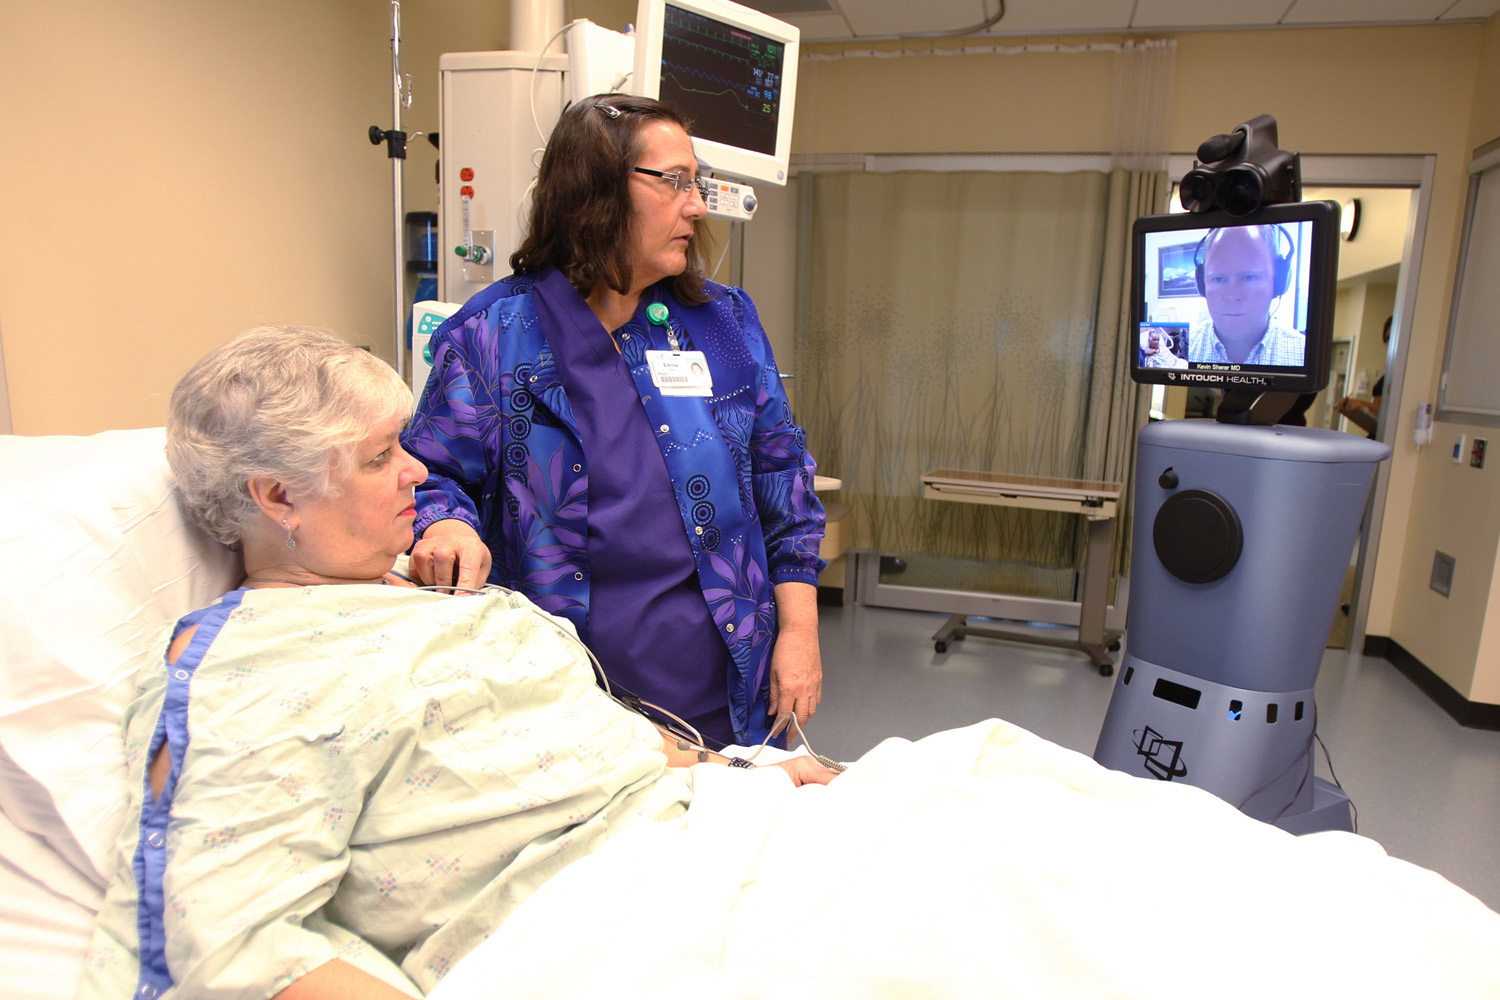 Photos by Andy Tullis/The Bulletin
Volunteer Anita Boucher lies in a hospital bed Wednesday in Redmond, Ore., while Dr. Kevin Sherer in Bend Ore., listens to her heart with the help of ICU nurse Emilie Bonney and telemedicine robot Roda.